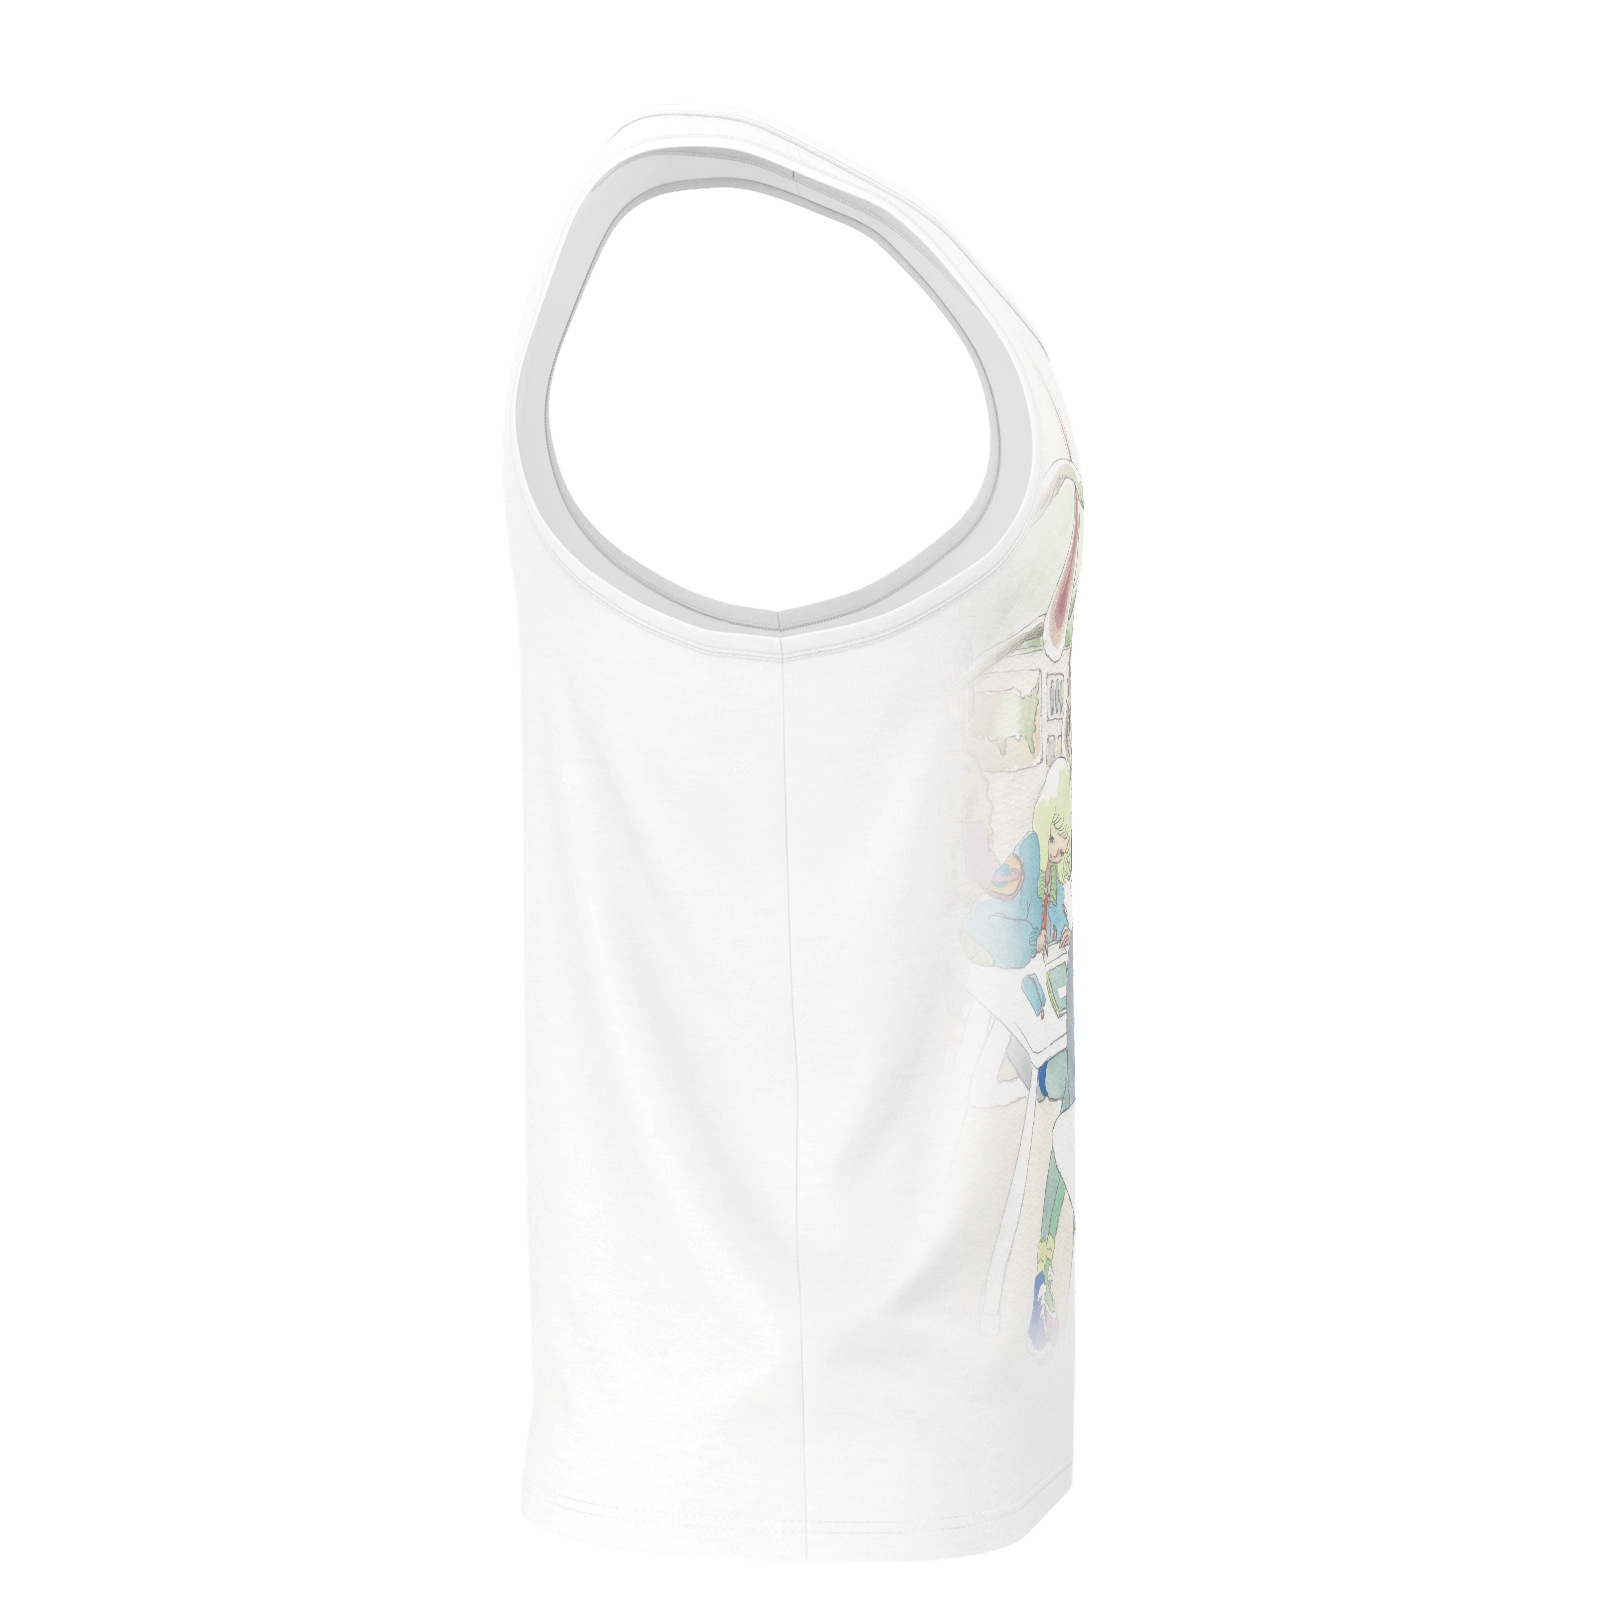 Paranoia Girls - 1 sided tank top - School - Poly 2019